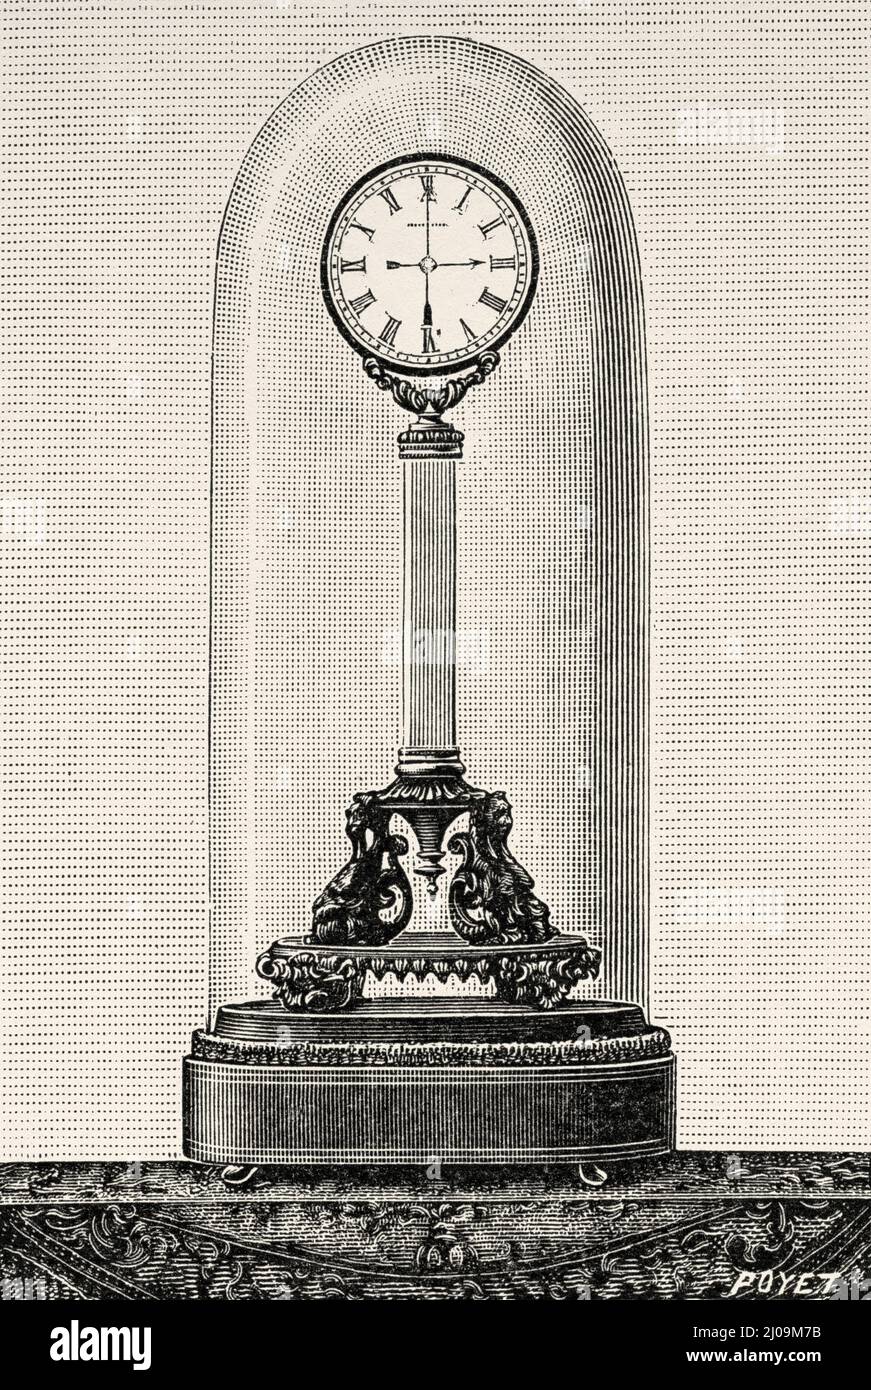 Clock by Robert Houdin. Old 19th century engraved illustration from La Nature 1899 Stock Photo